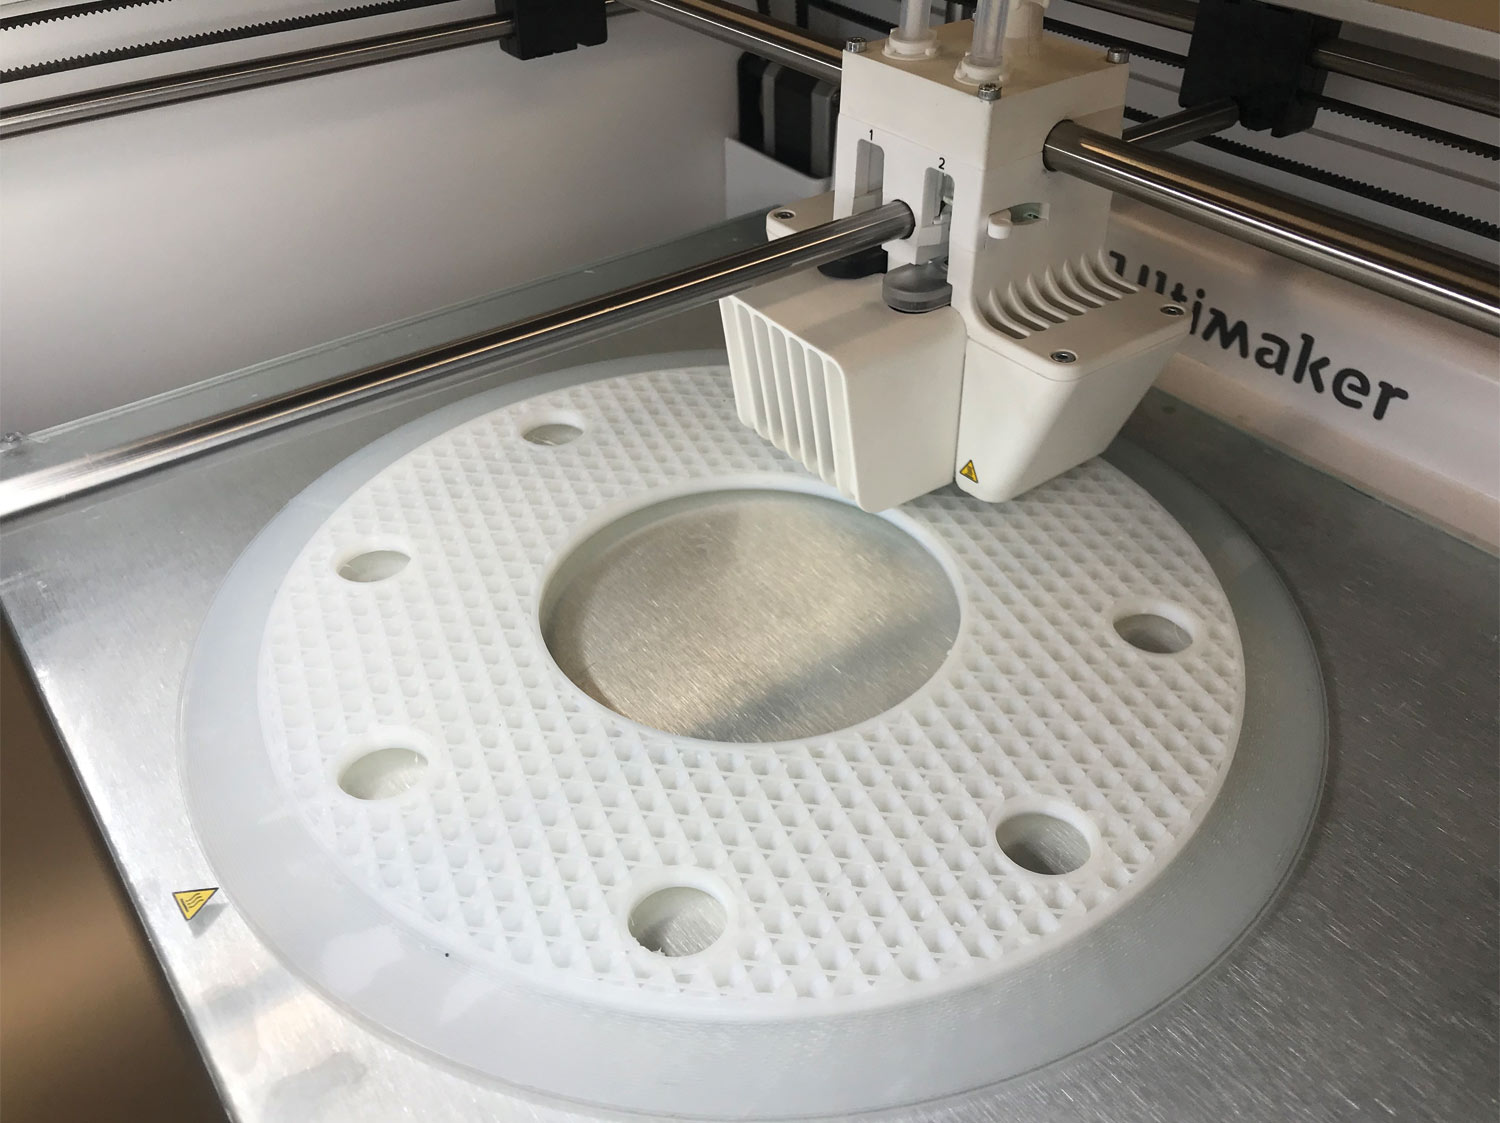 a common printing apparatus using PVDF filament to print an 8.5" flange